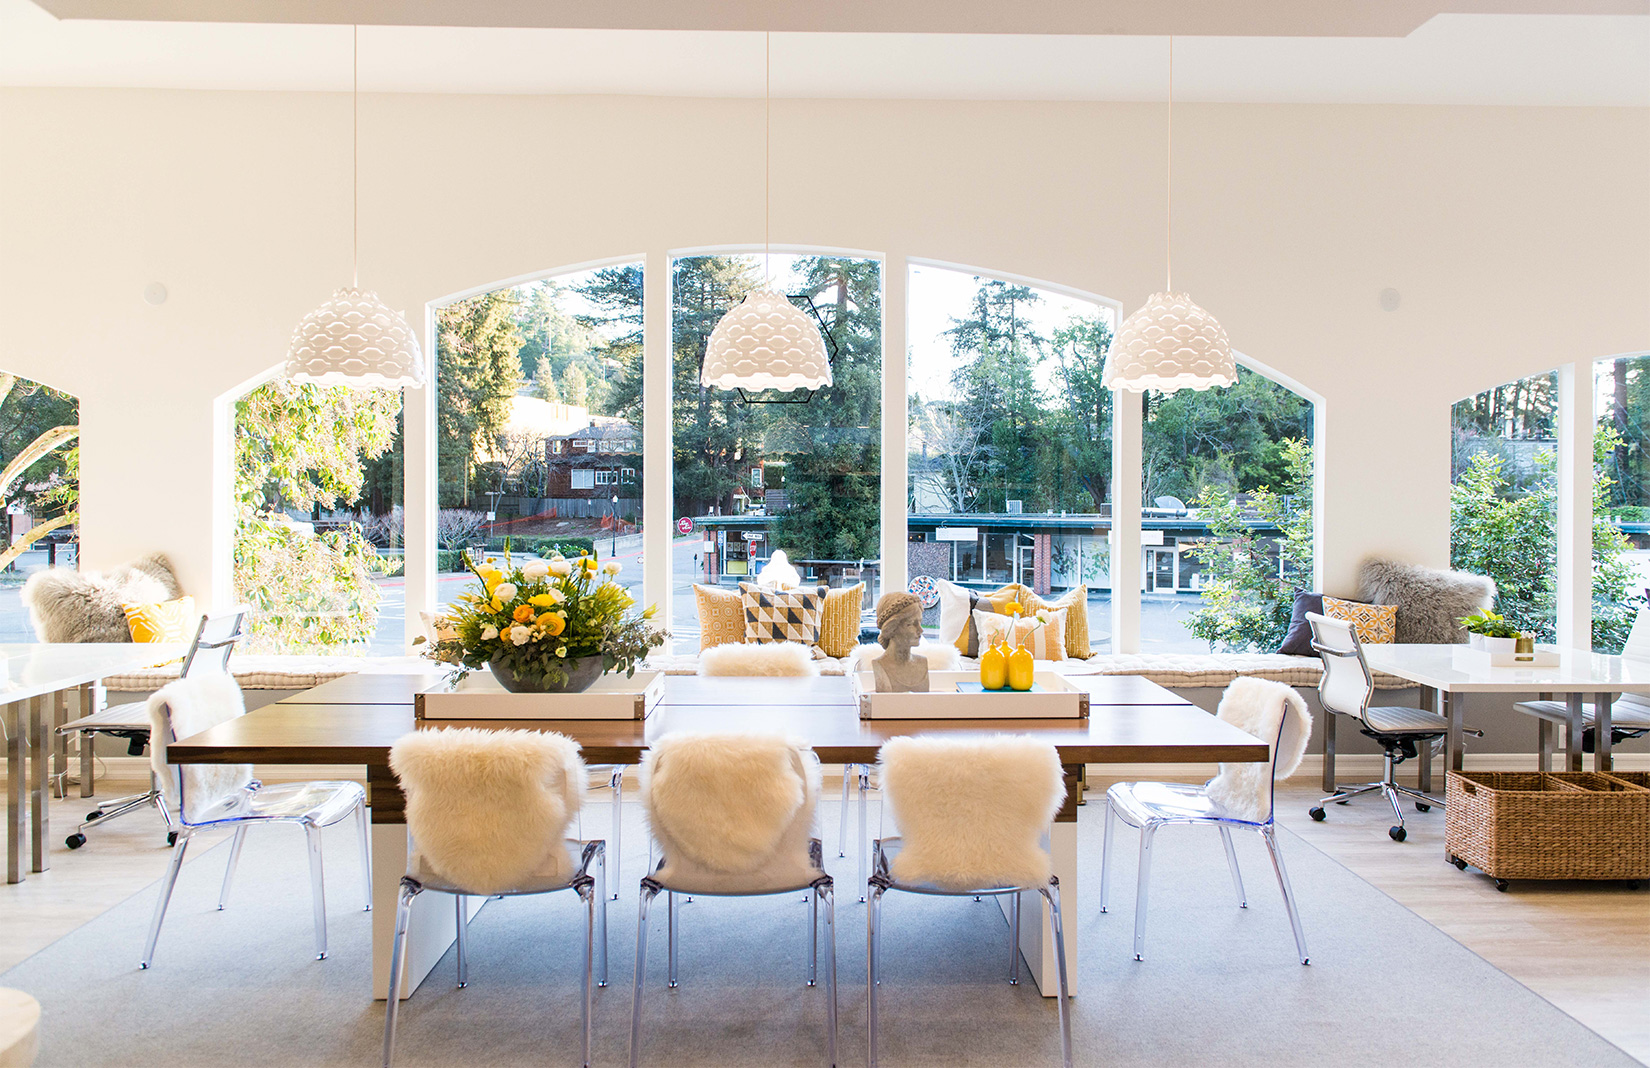 The Hivery coworking space in Mill Valley, California